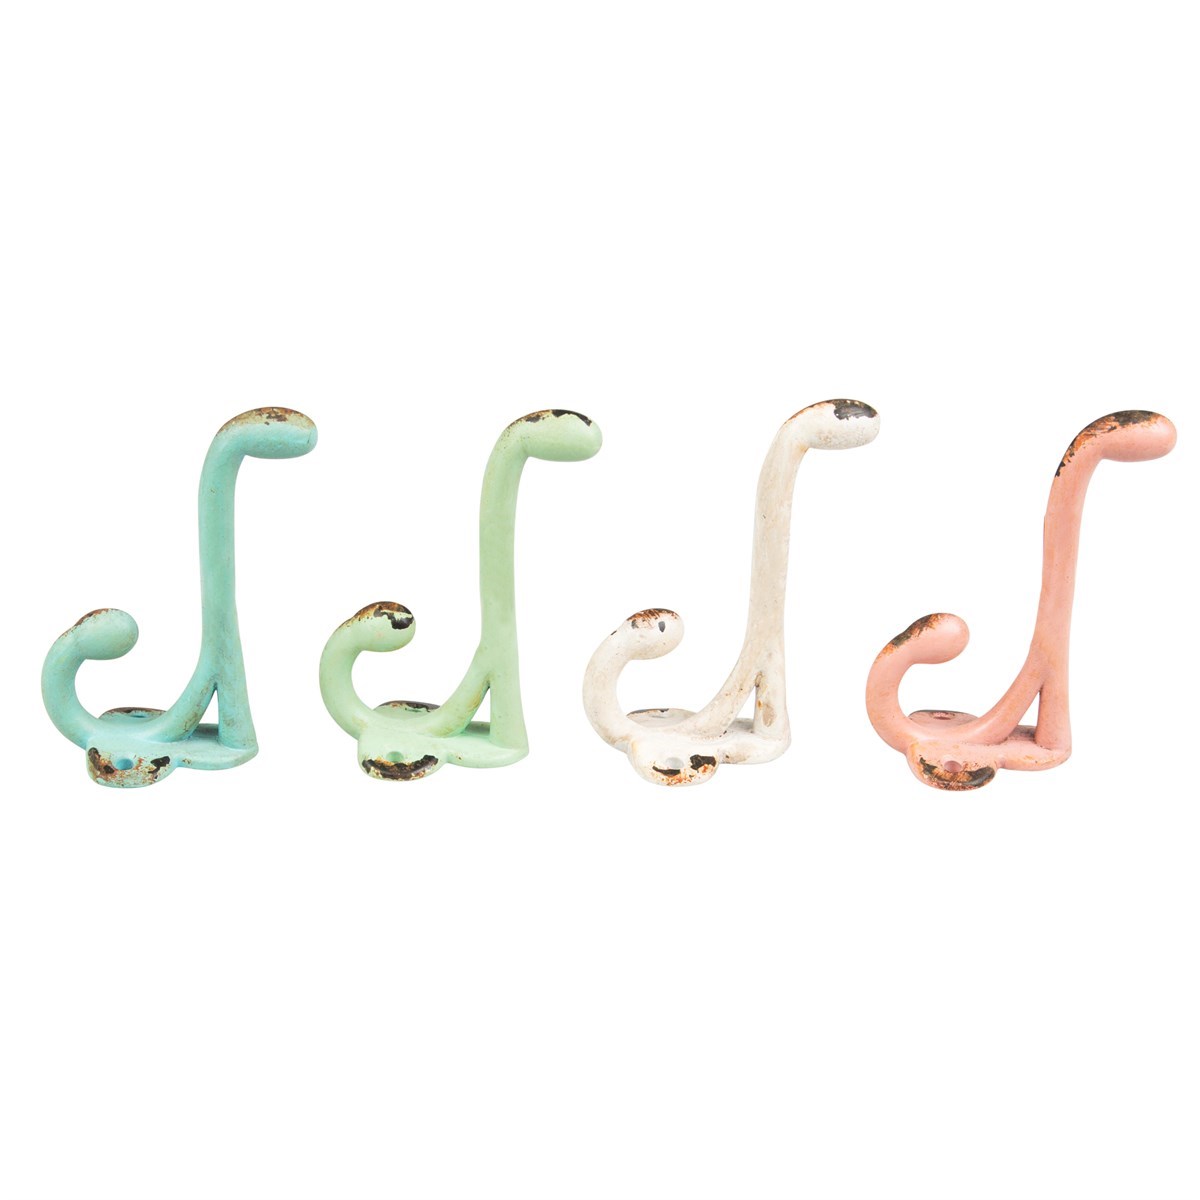 Sass & Belle  Rustic Boudoir Double Hook : Blue, Green, White or Pink